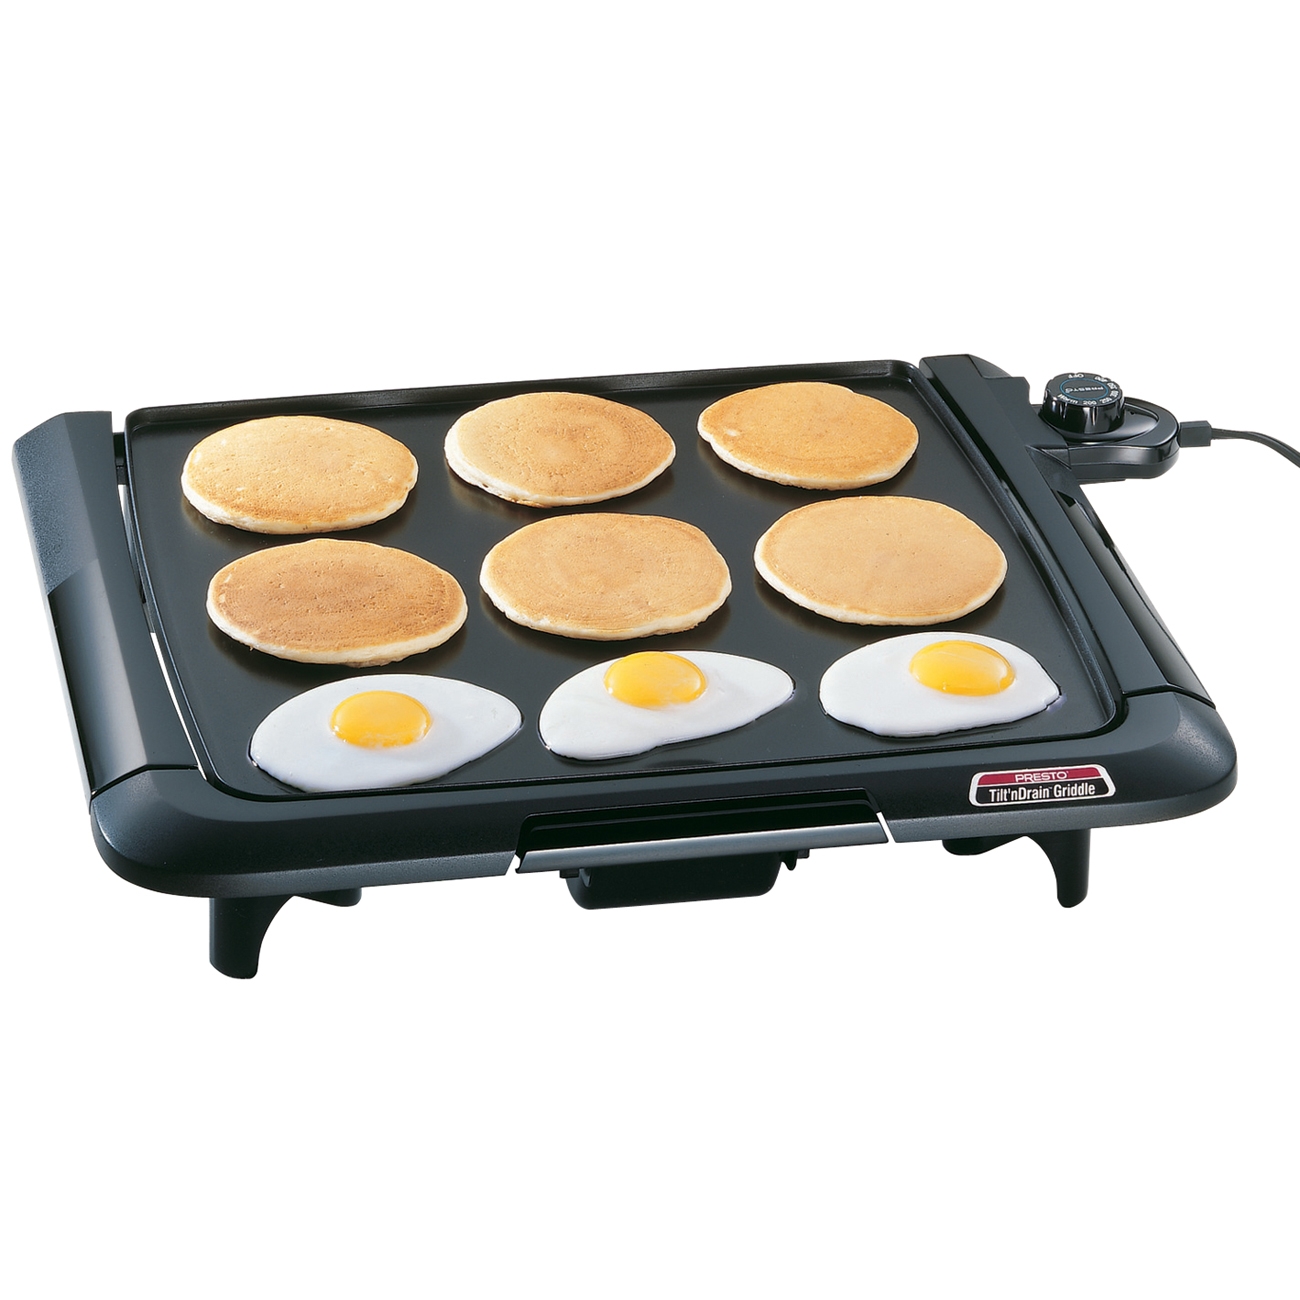 Presto Tilt 'n' Drain Cool Touch Electric Griddle - image 1 of 3